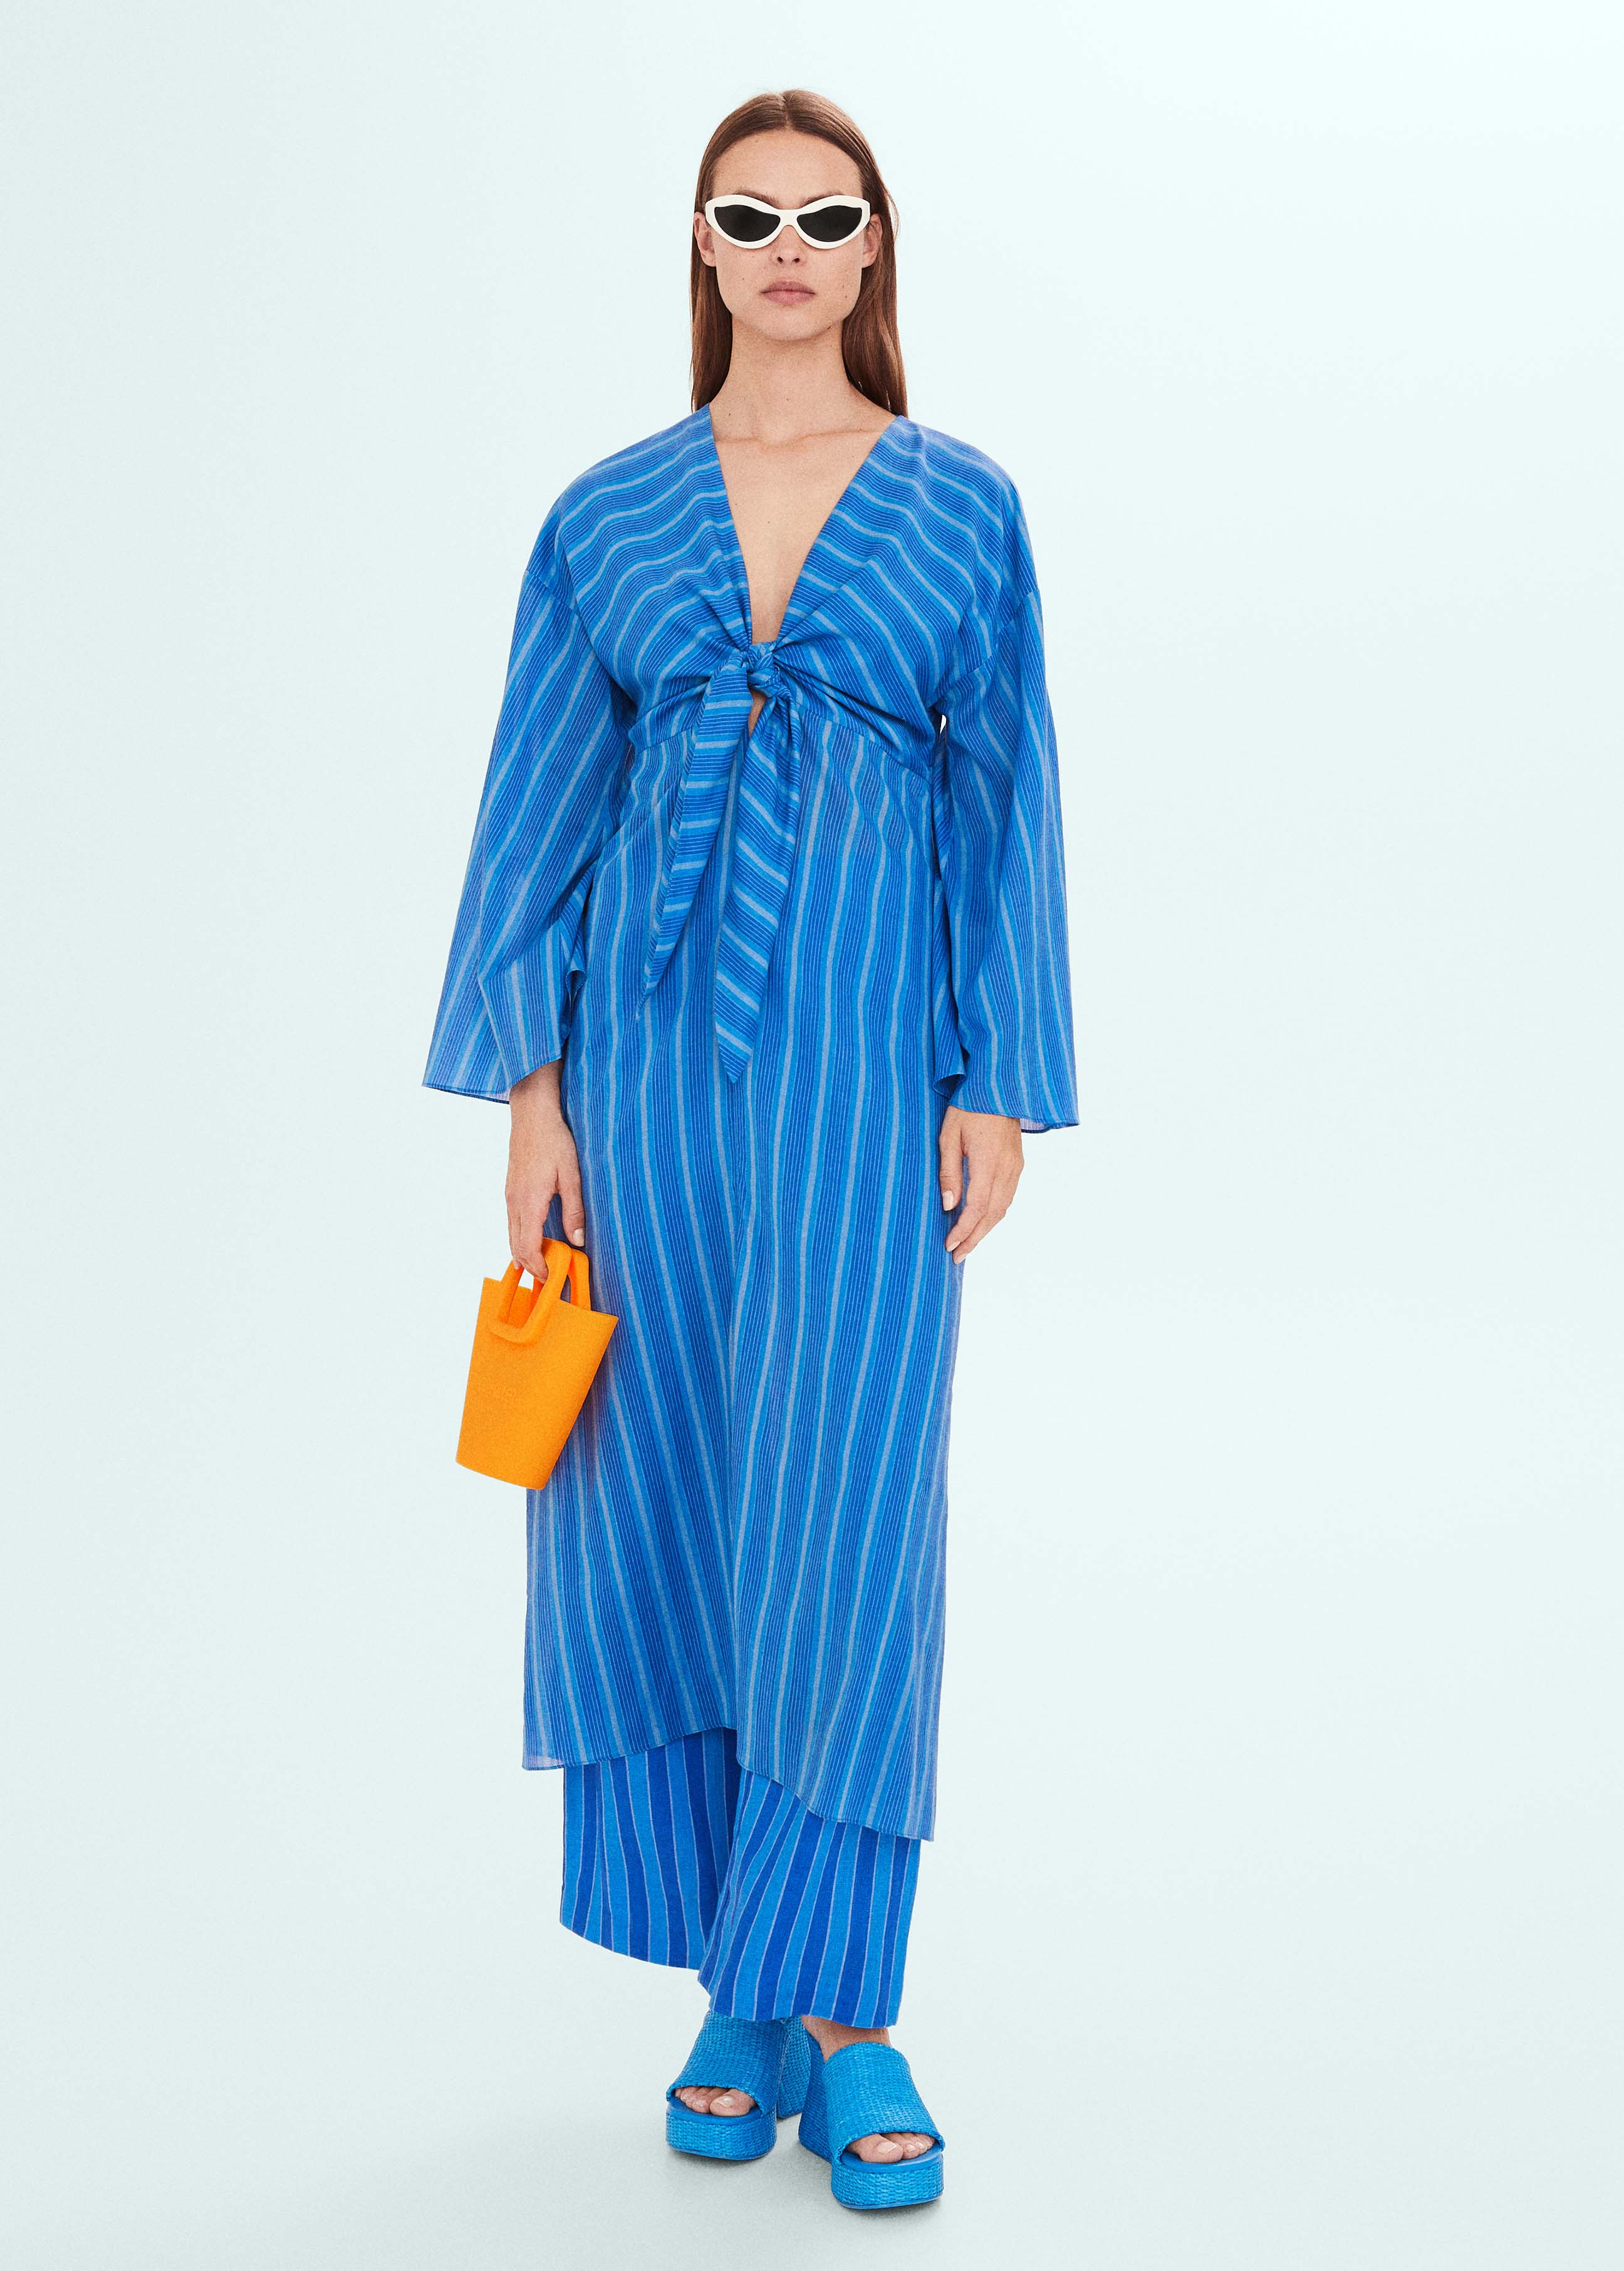 Striped dress with knot detail - General plane